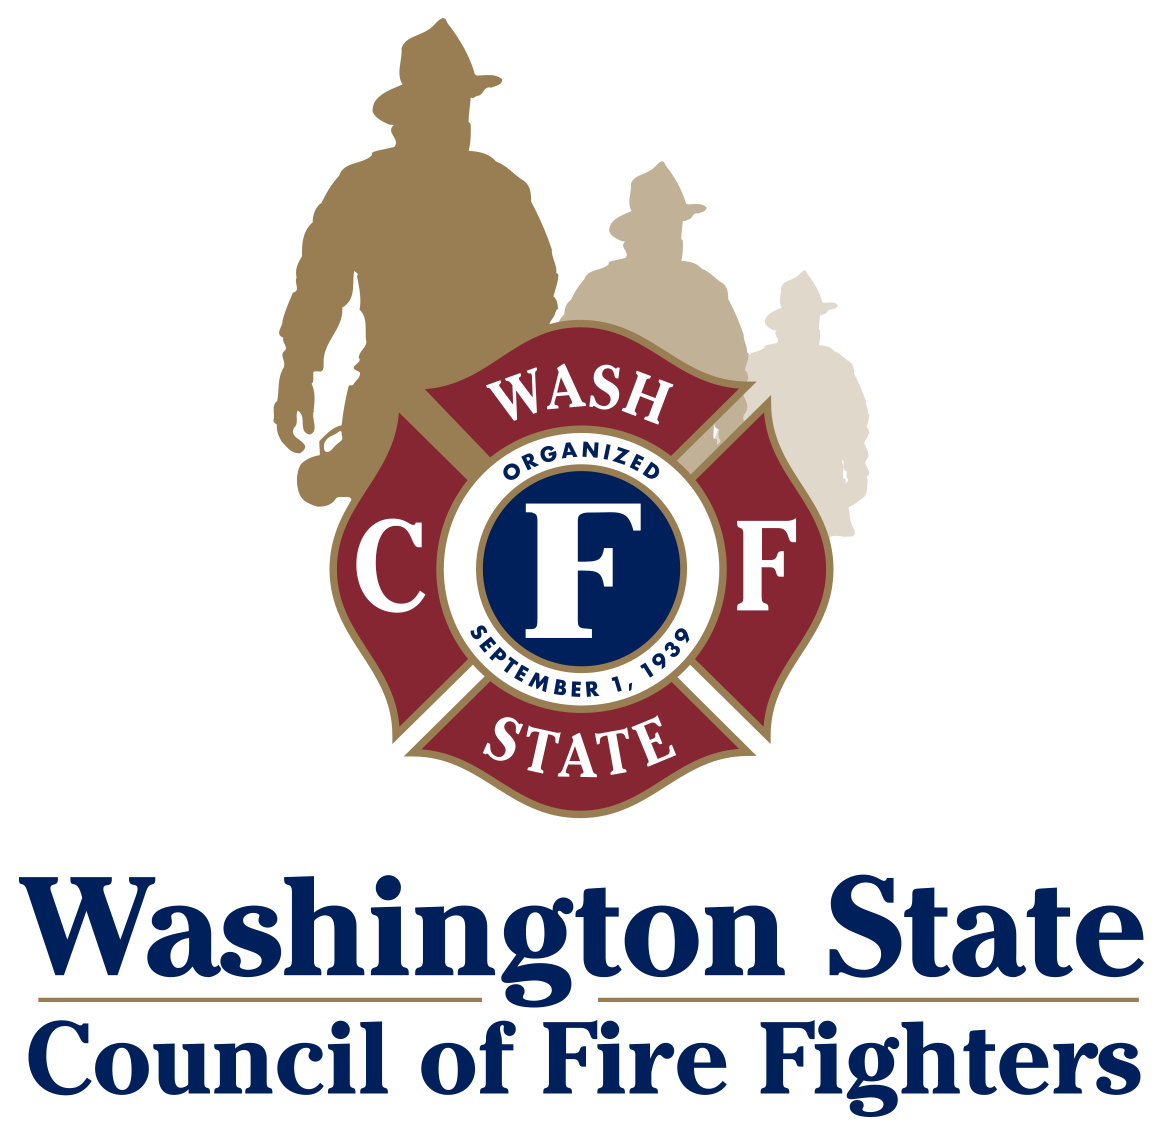 Home - Washington State Council of Fire Fighters